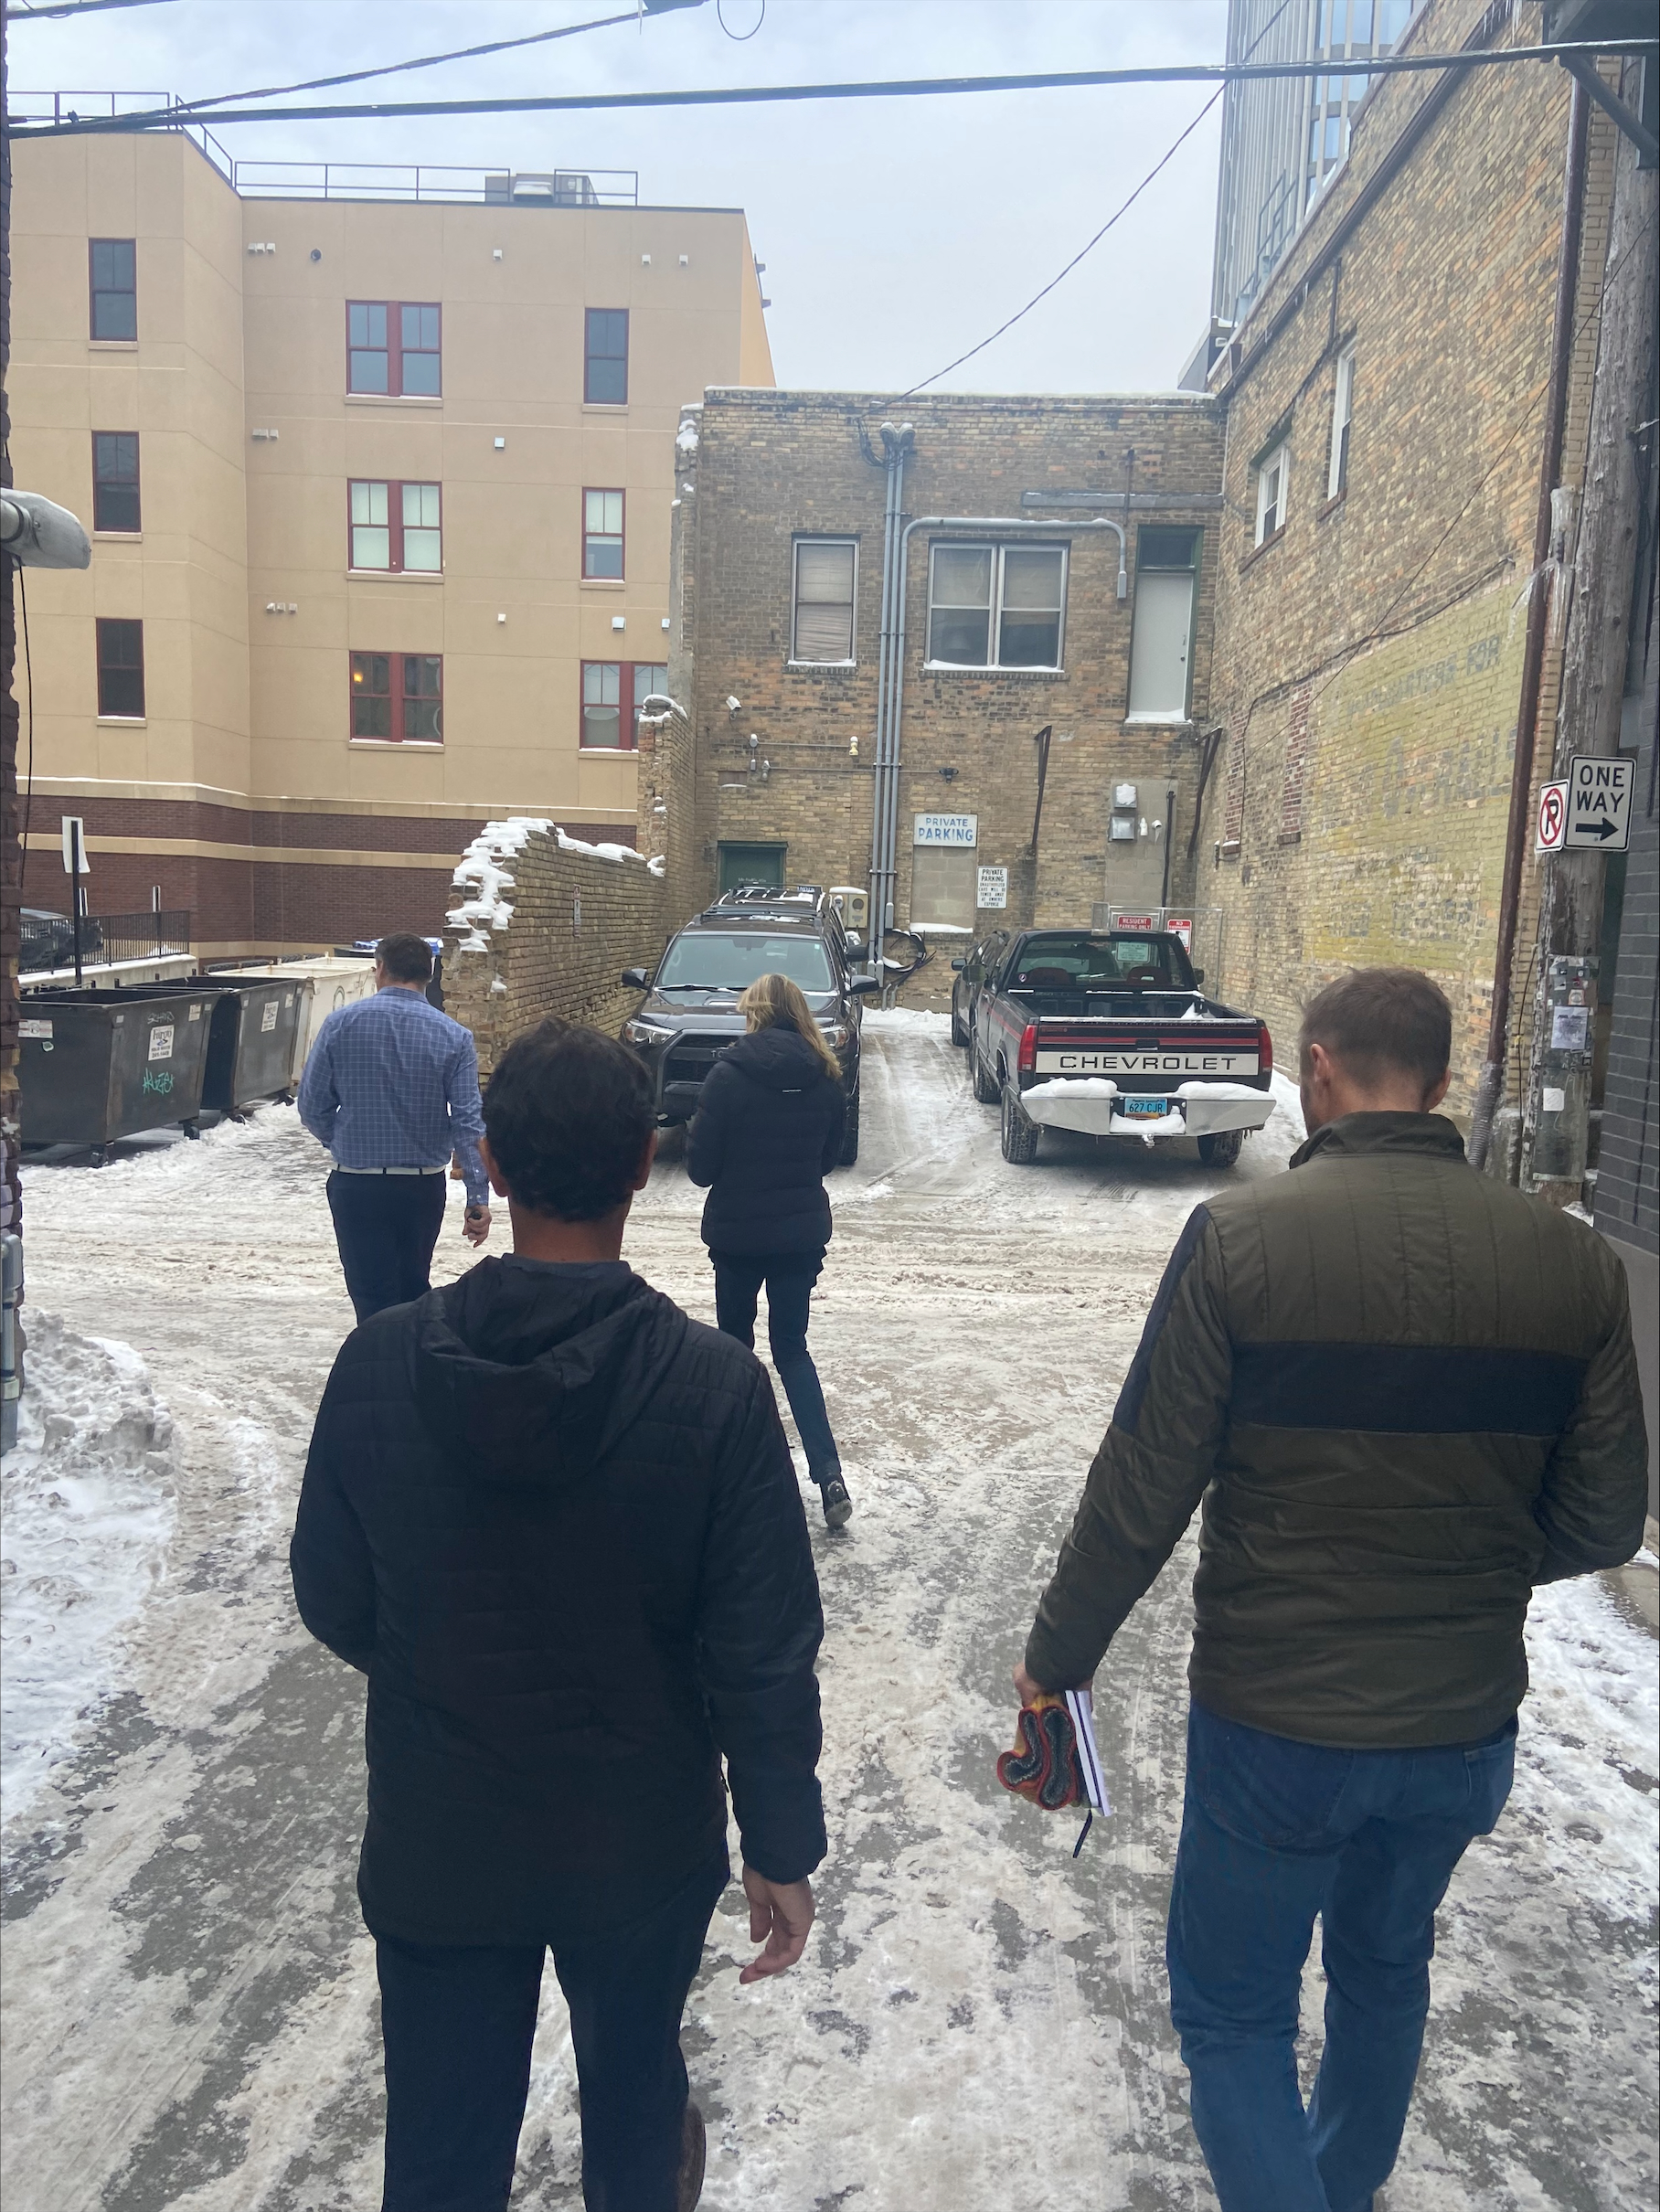 people walking down an alley in the winter